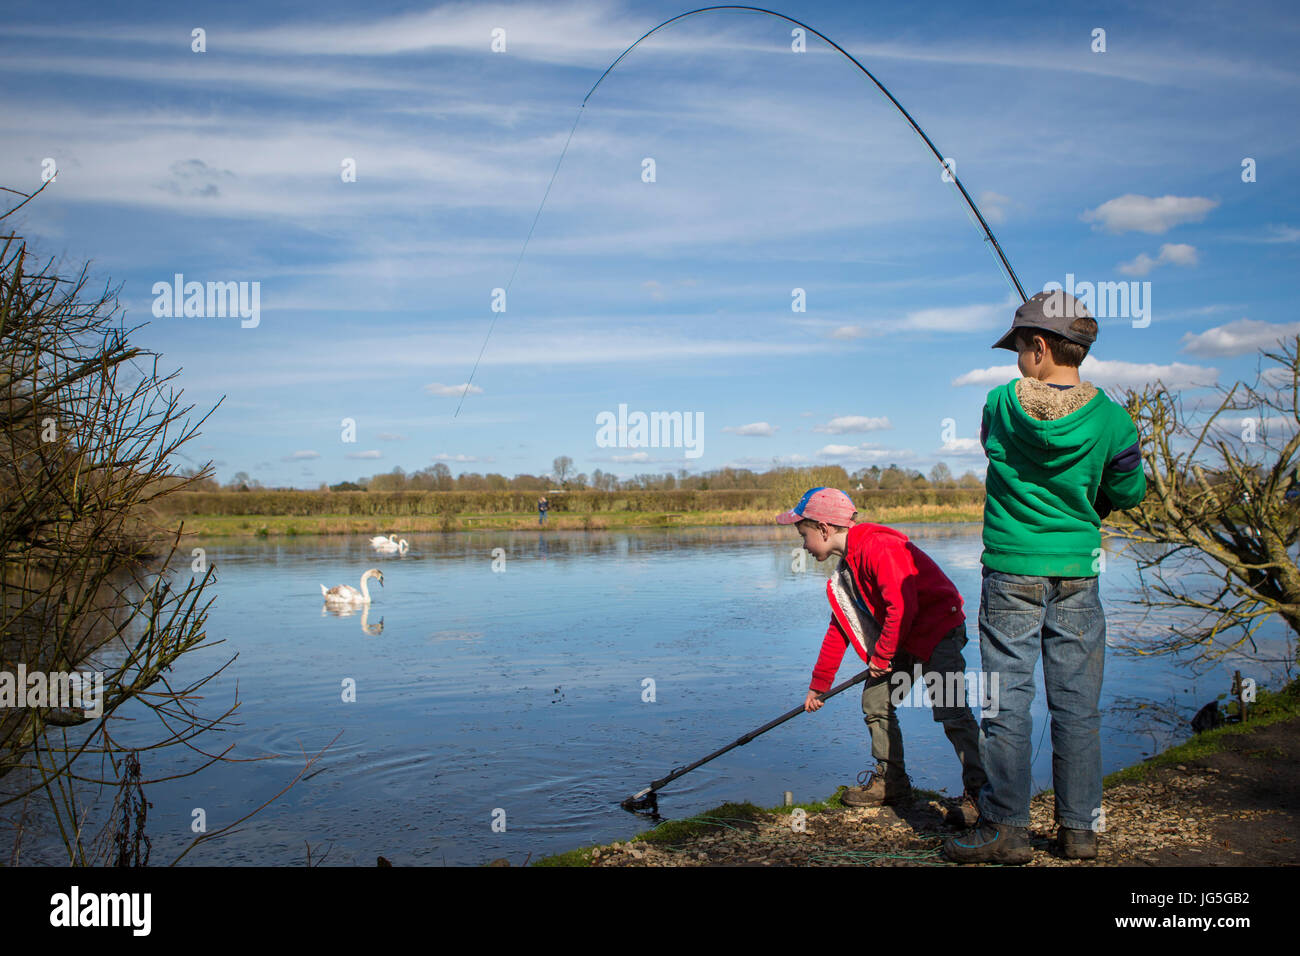 Two boys catching and netting a fish in a lake, England, UK Stock Photo